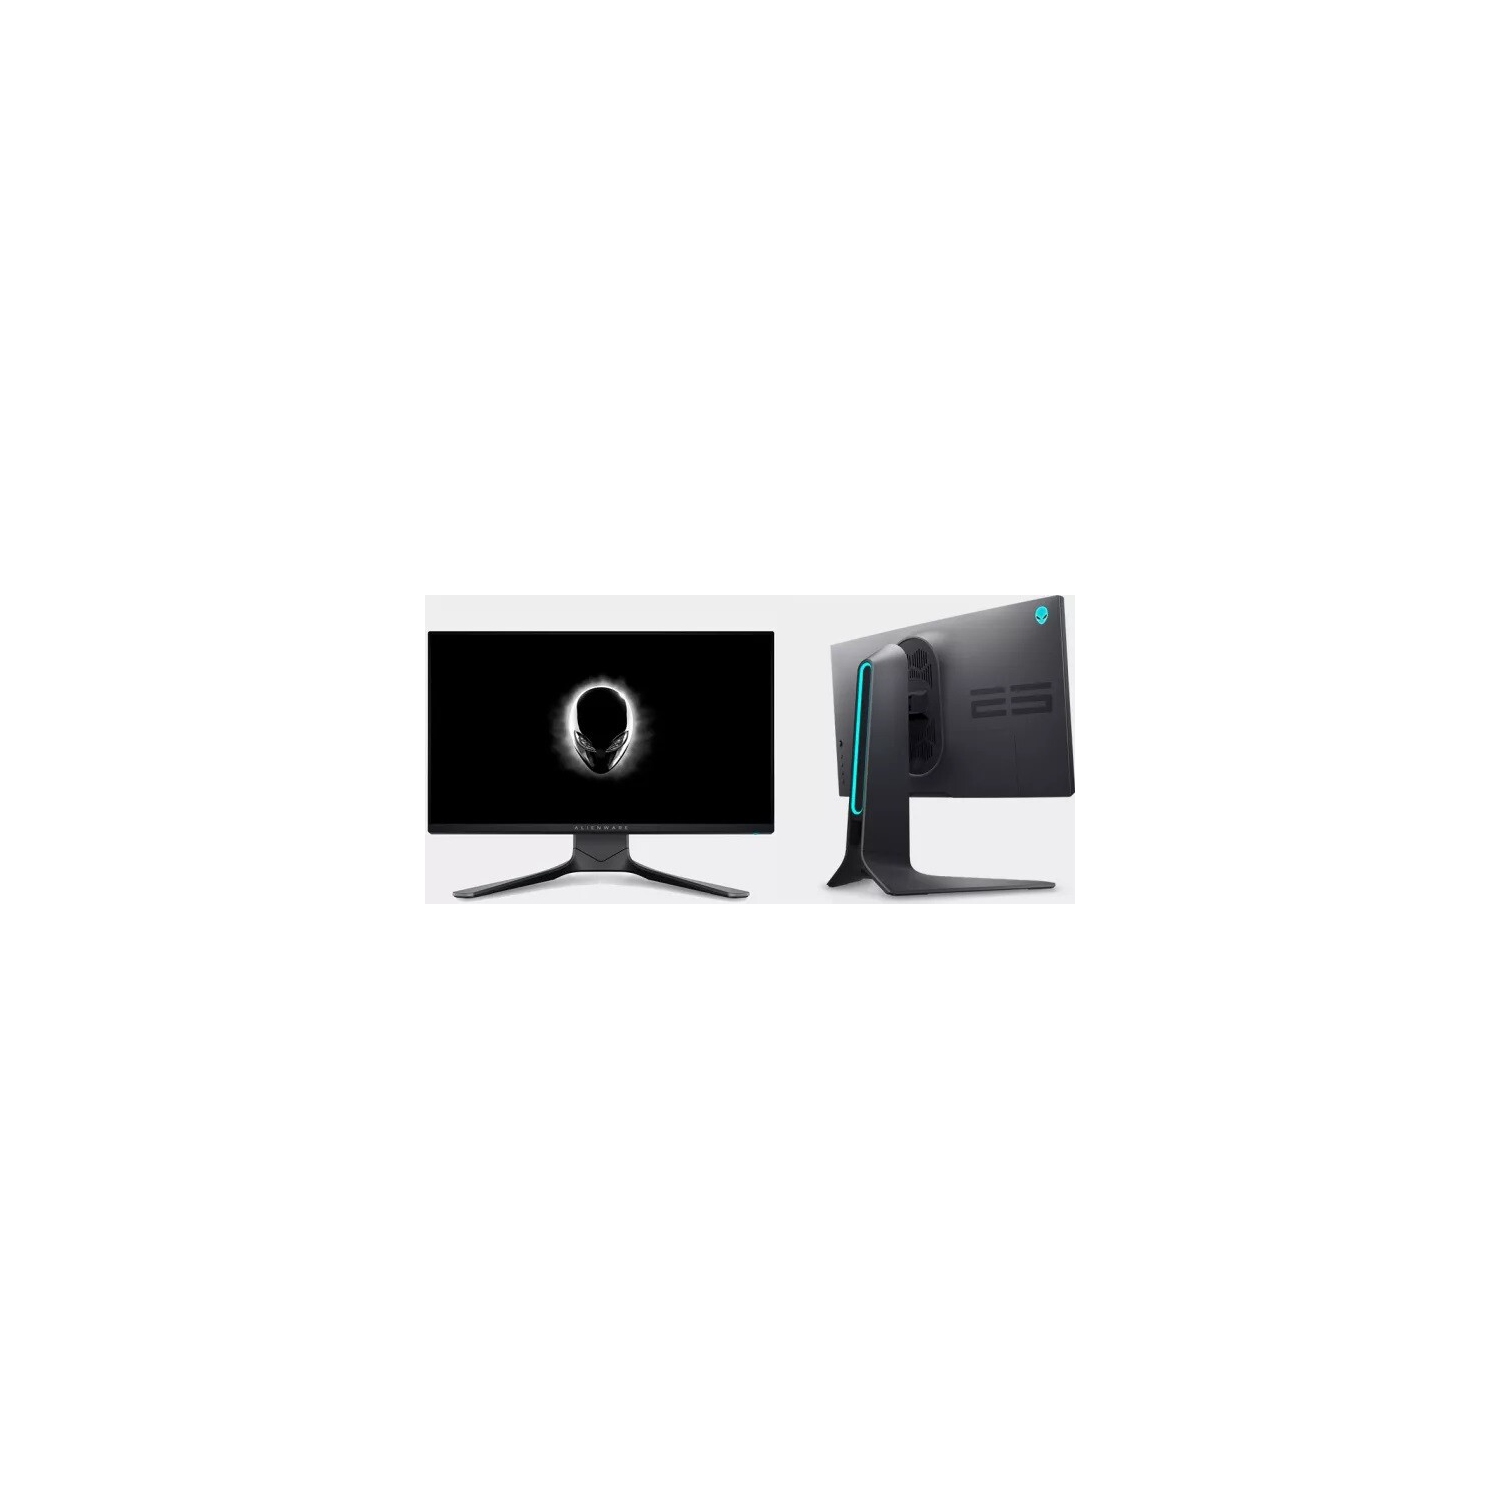 Refurbished (Excellent) - Alienware AW2521H (Gaming) Nvidia G-Sync, 25" FHD 1920x1080 360Hz, 2X HDMI, DP, 1ms GtG Fast IPS, Certified Refurbished